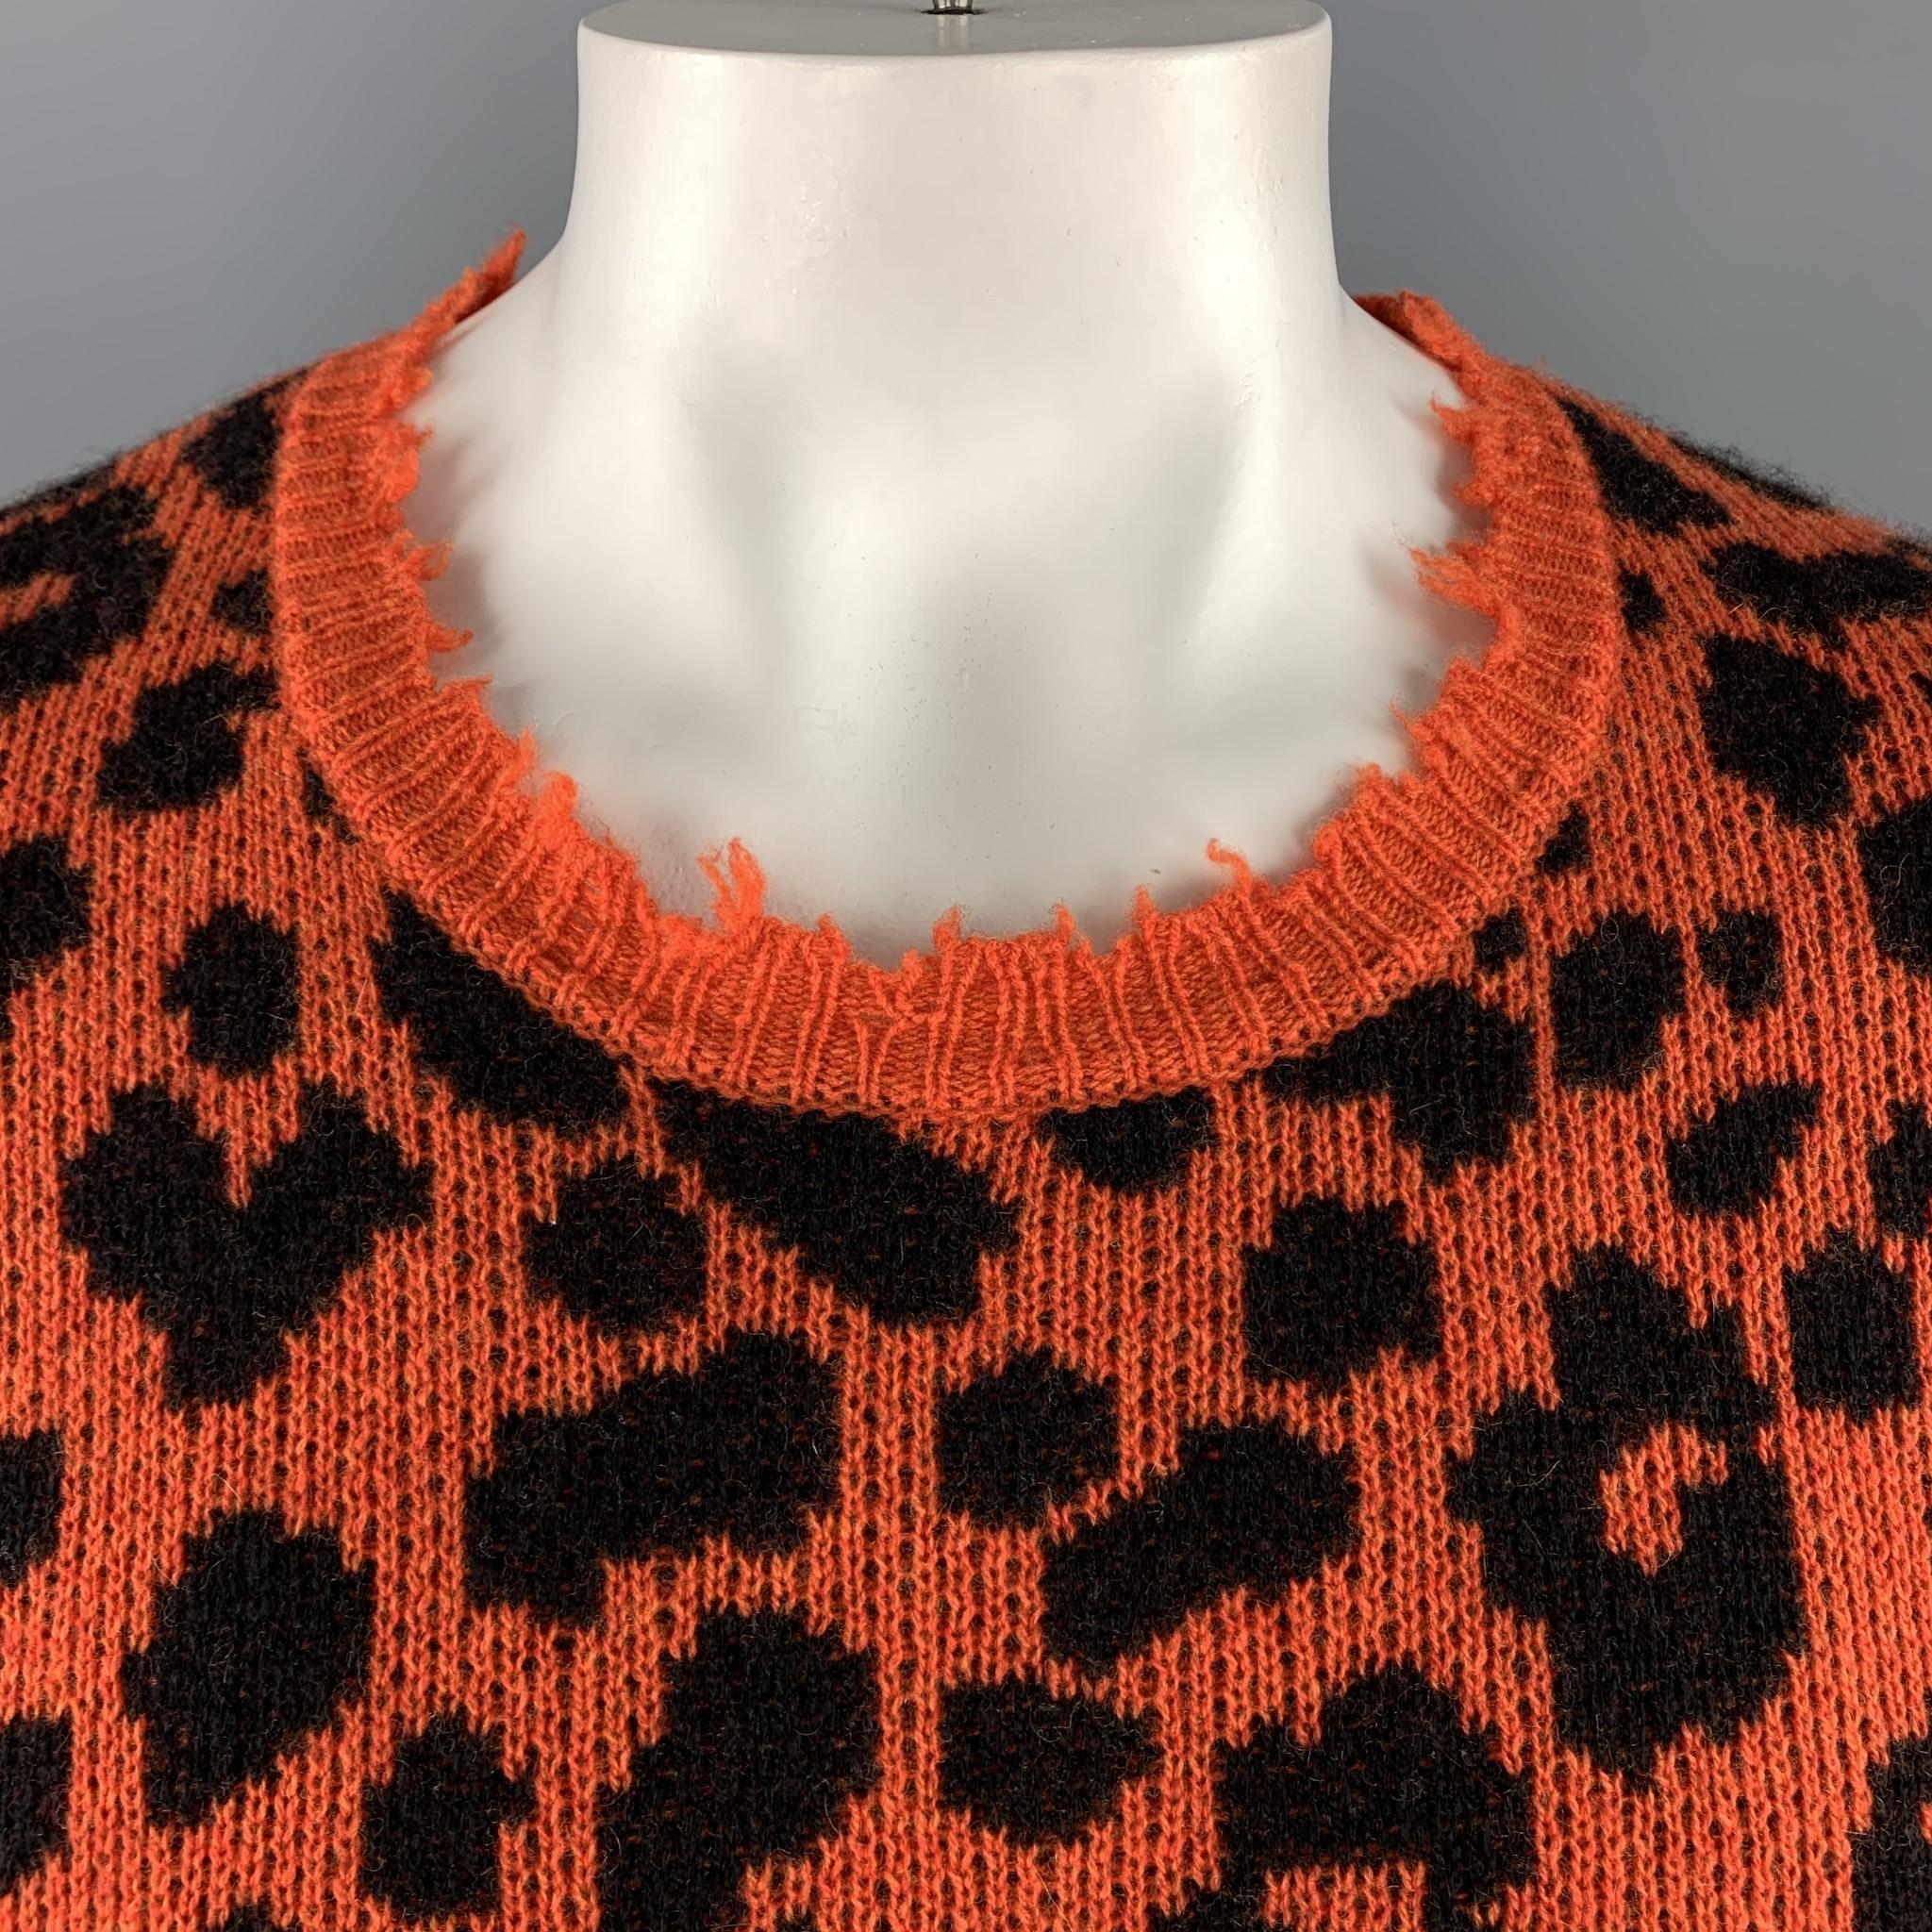 R13 pullover sweater comes in orange and black leopard print cashmere with a scoop neck and distressed hems. 

New with Tags. 
Marked: L

Measurements:

Shoulder: 21 in.
Chest: 52 in.
Sleeve: 31 in.
Length: 30.5 in.